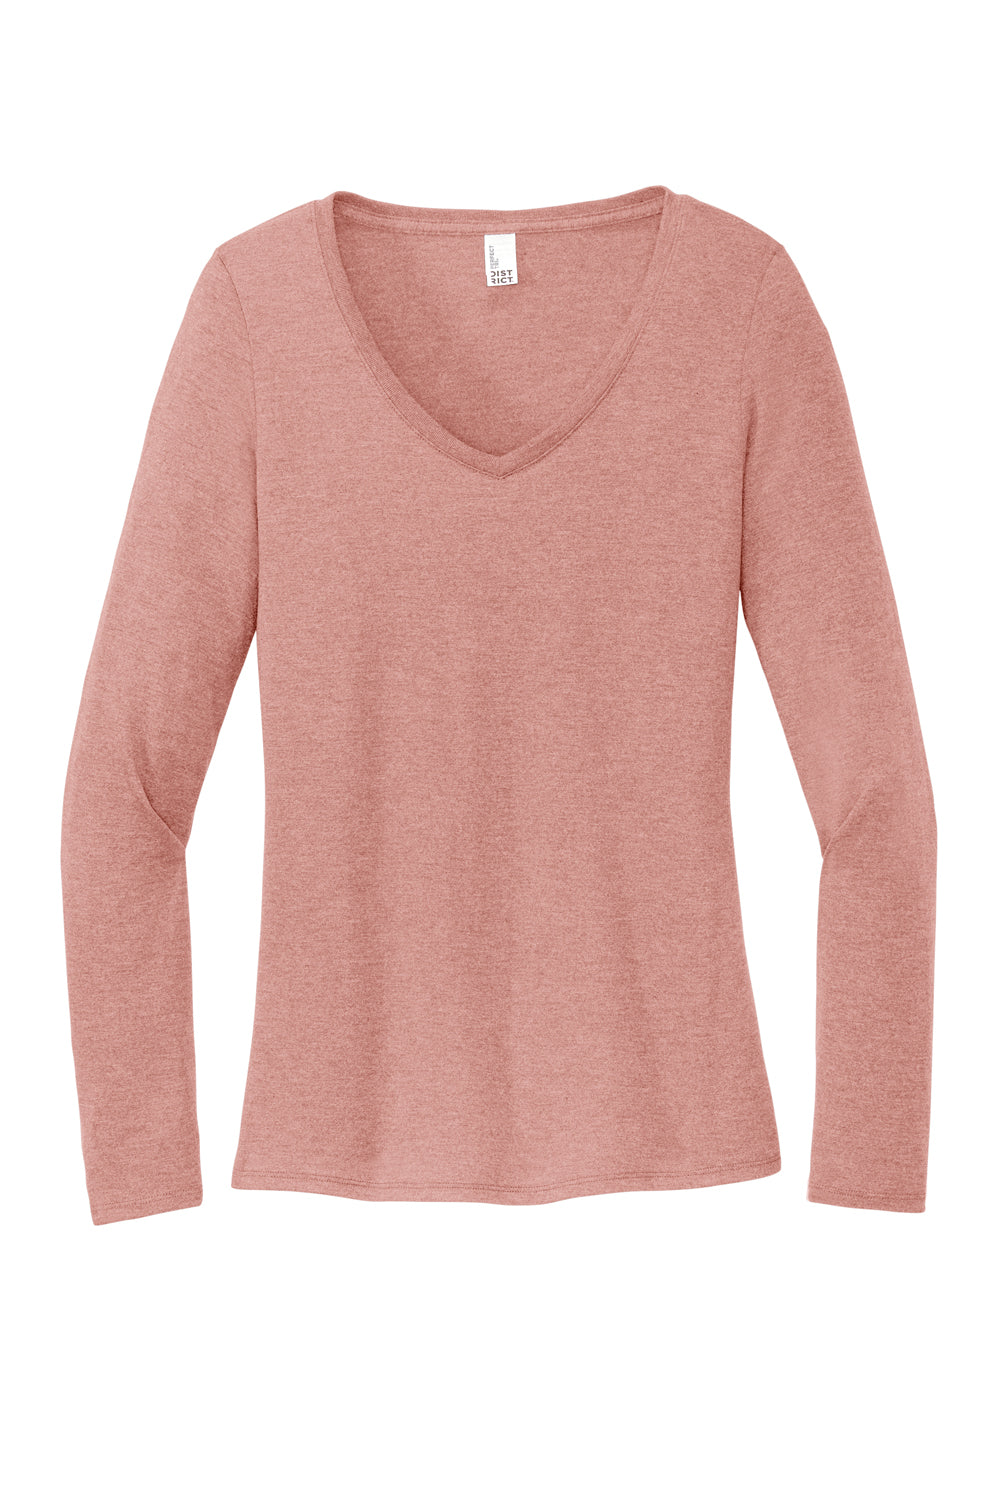 District DT135 Womens Perfect Tri Long Sleeve V-Neck T-Shirt Blush Frost Flat Front